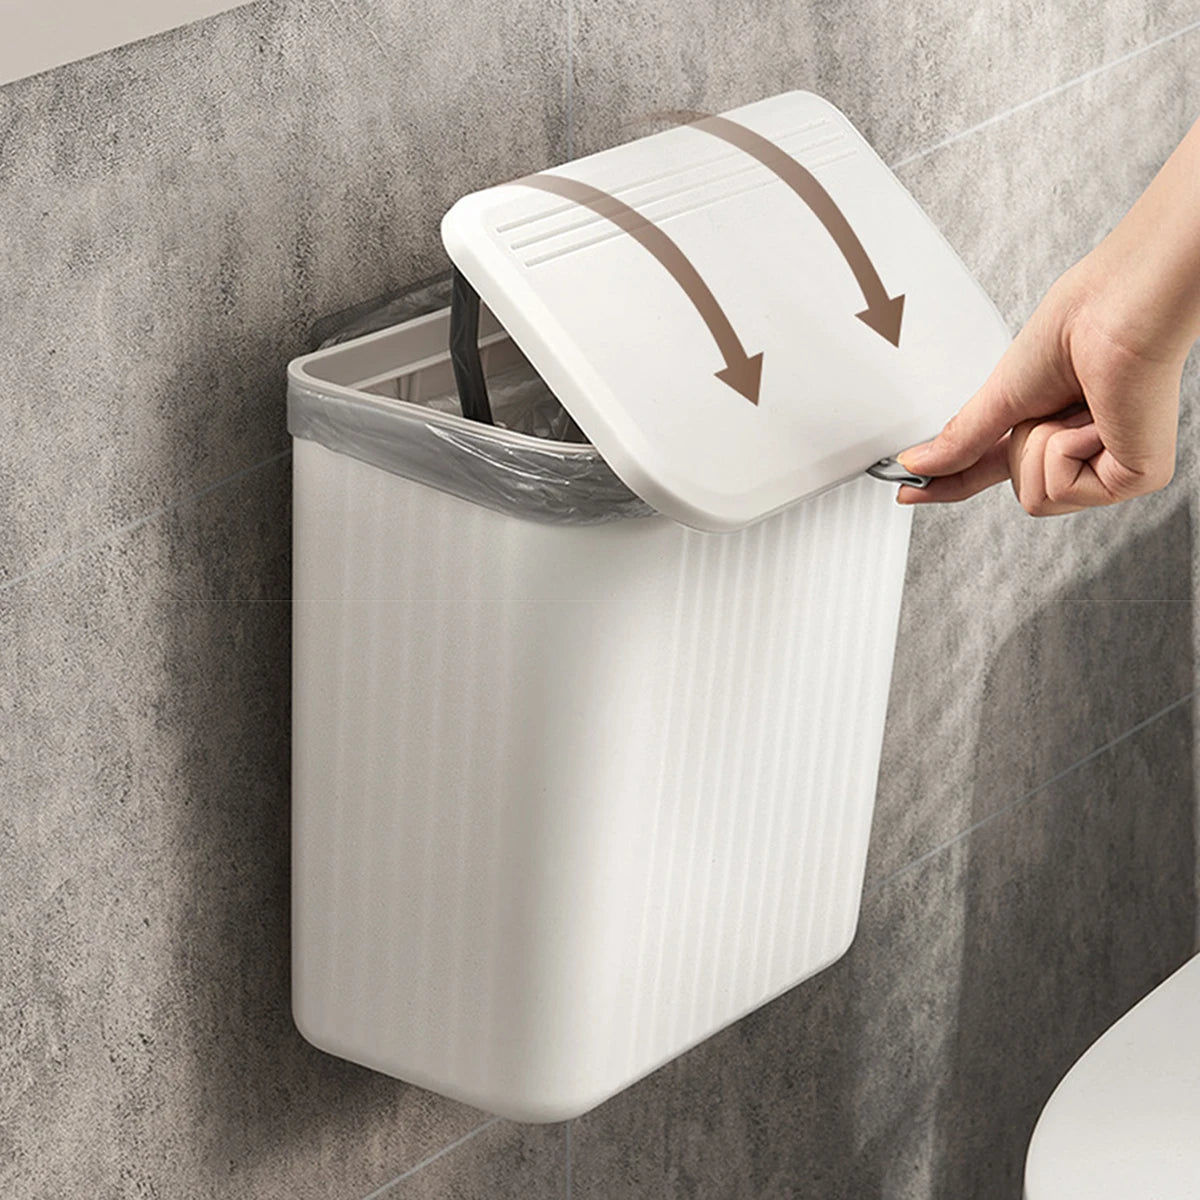 Wall-Mounted Trash Can